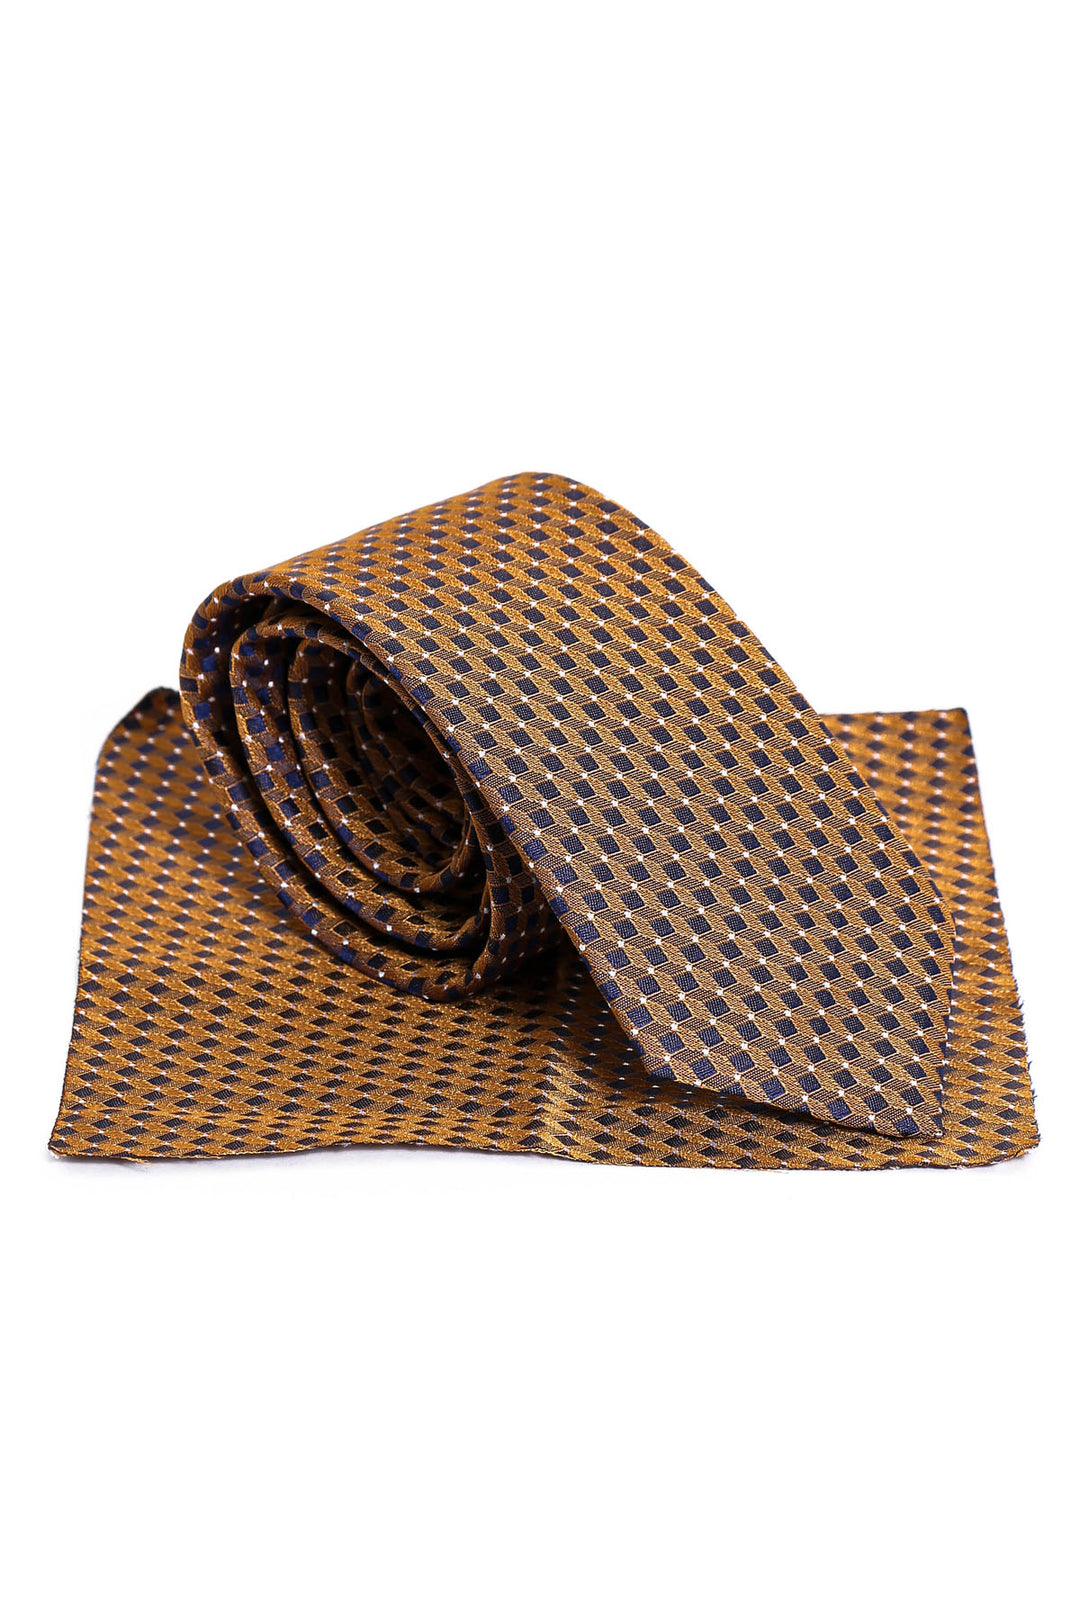 Black Cube Patterned Men Yellow Tie- Wessi